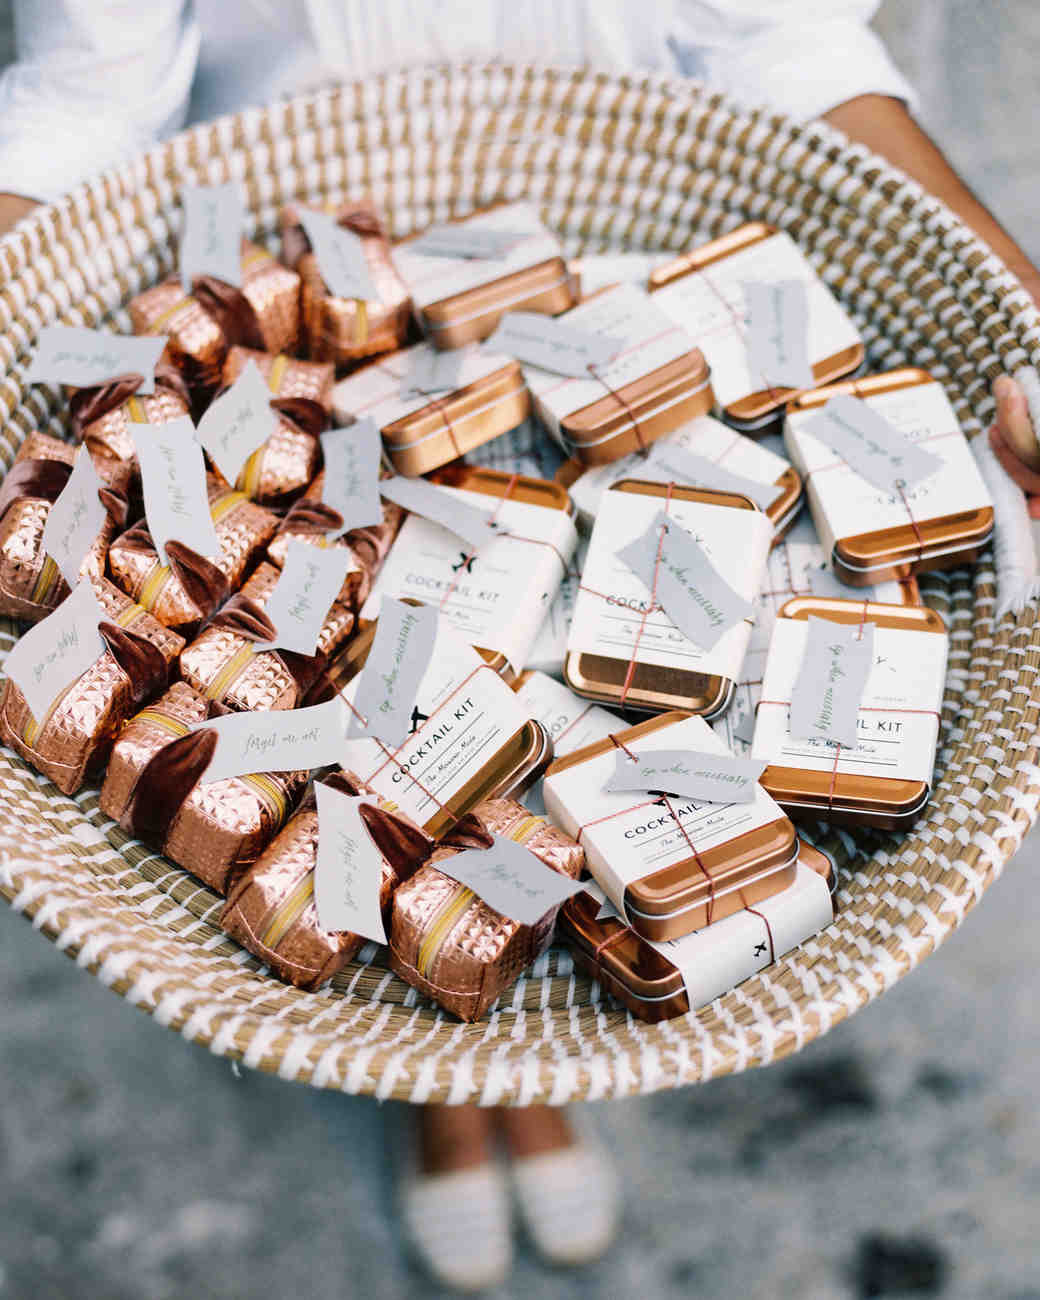 Creative Wedding Favors
 50 Creative Wedding Favors That Will Delight Your Guests